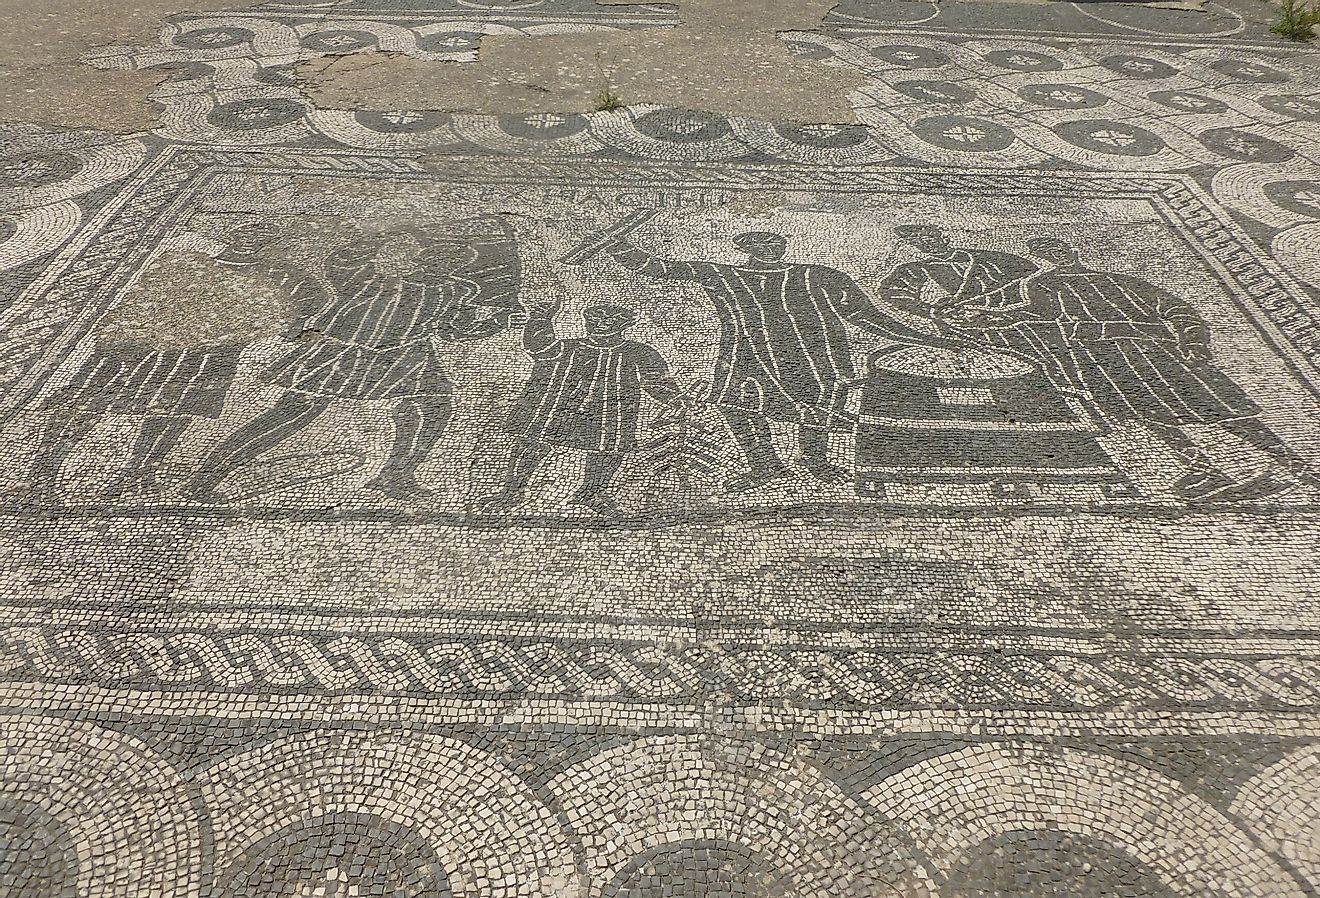 Black-and-white mosaic; depicted are grain measurers (mensores frumentarii) at work. Image credit MumblerJamie, CC BY-SA 2.0 <https://creativecommons.org/licenses/by-sa/2.0>, via Wikimedia Commons